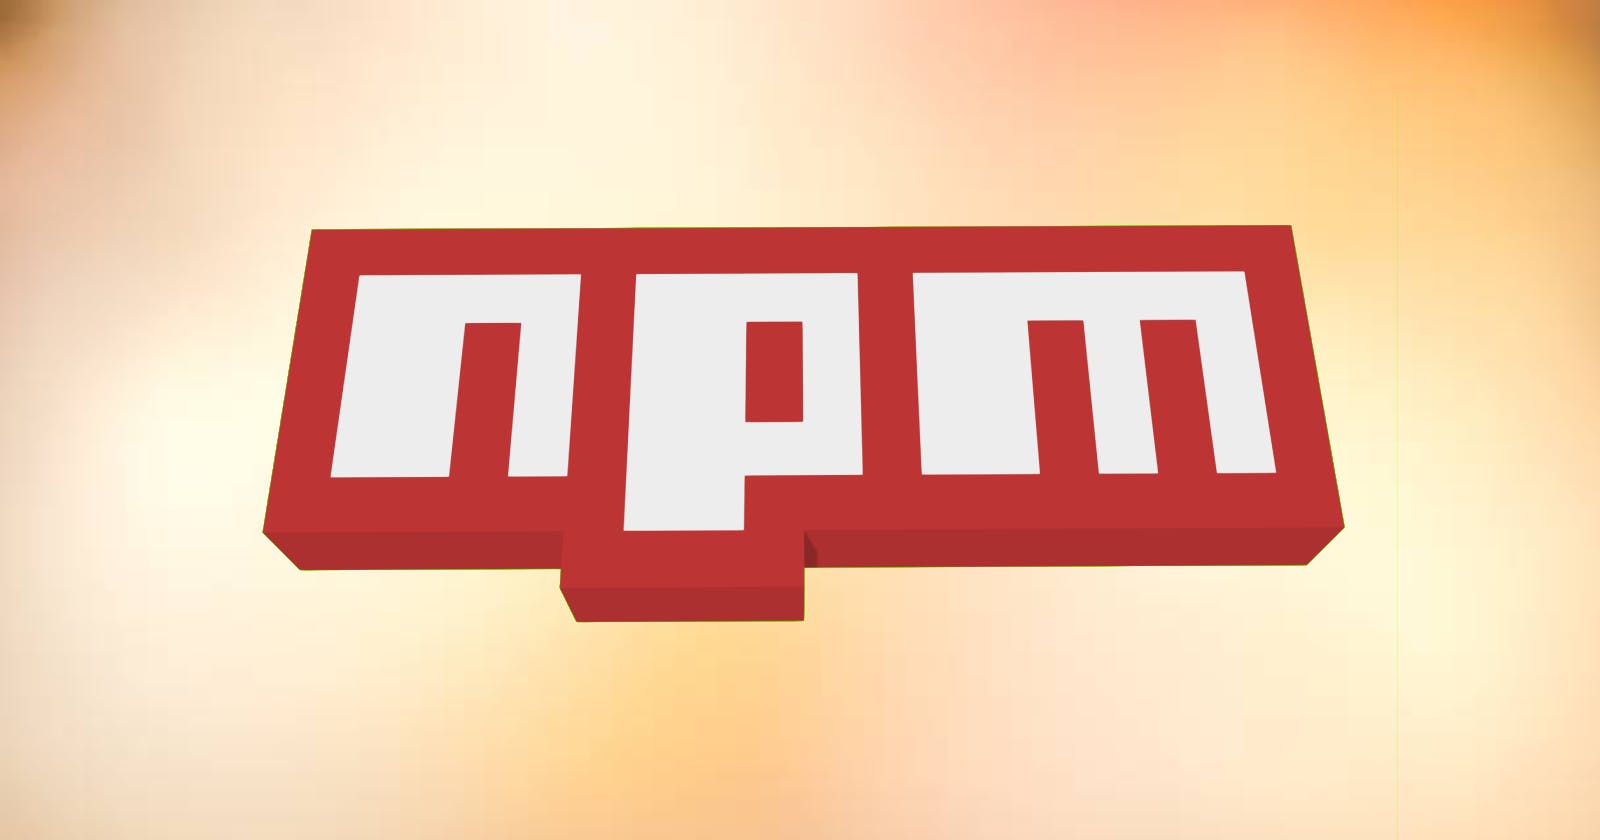 Getting Started with NPM:
A Step-by-Step Guide to Creating and Publishing Your Own Package